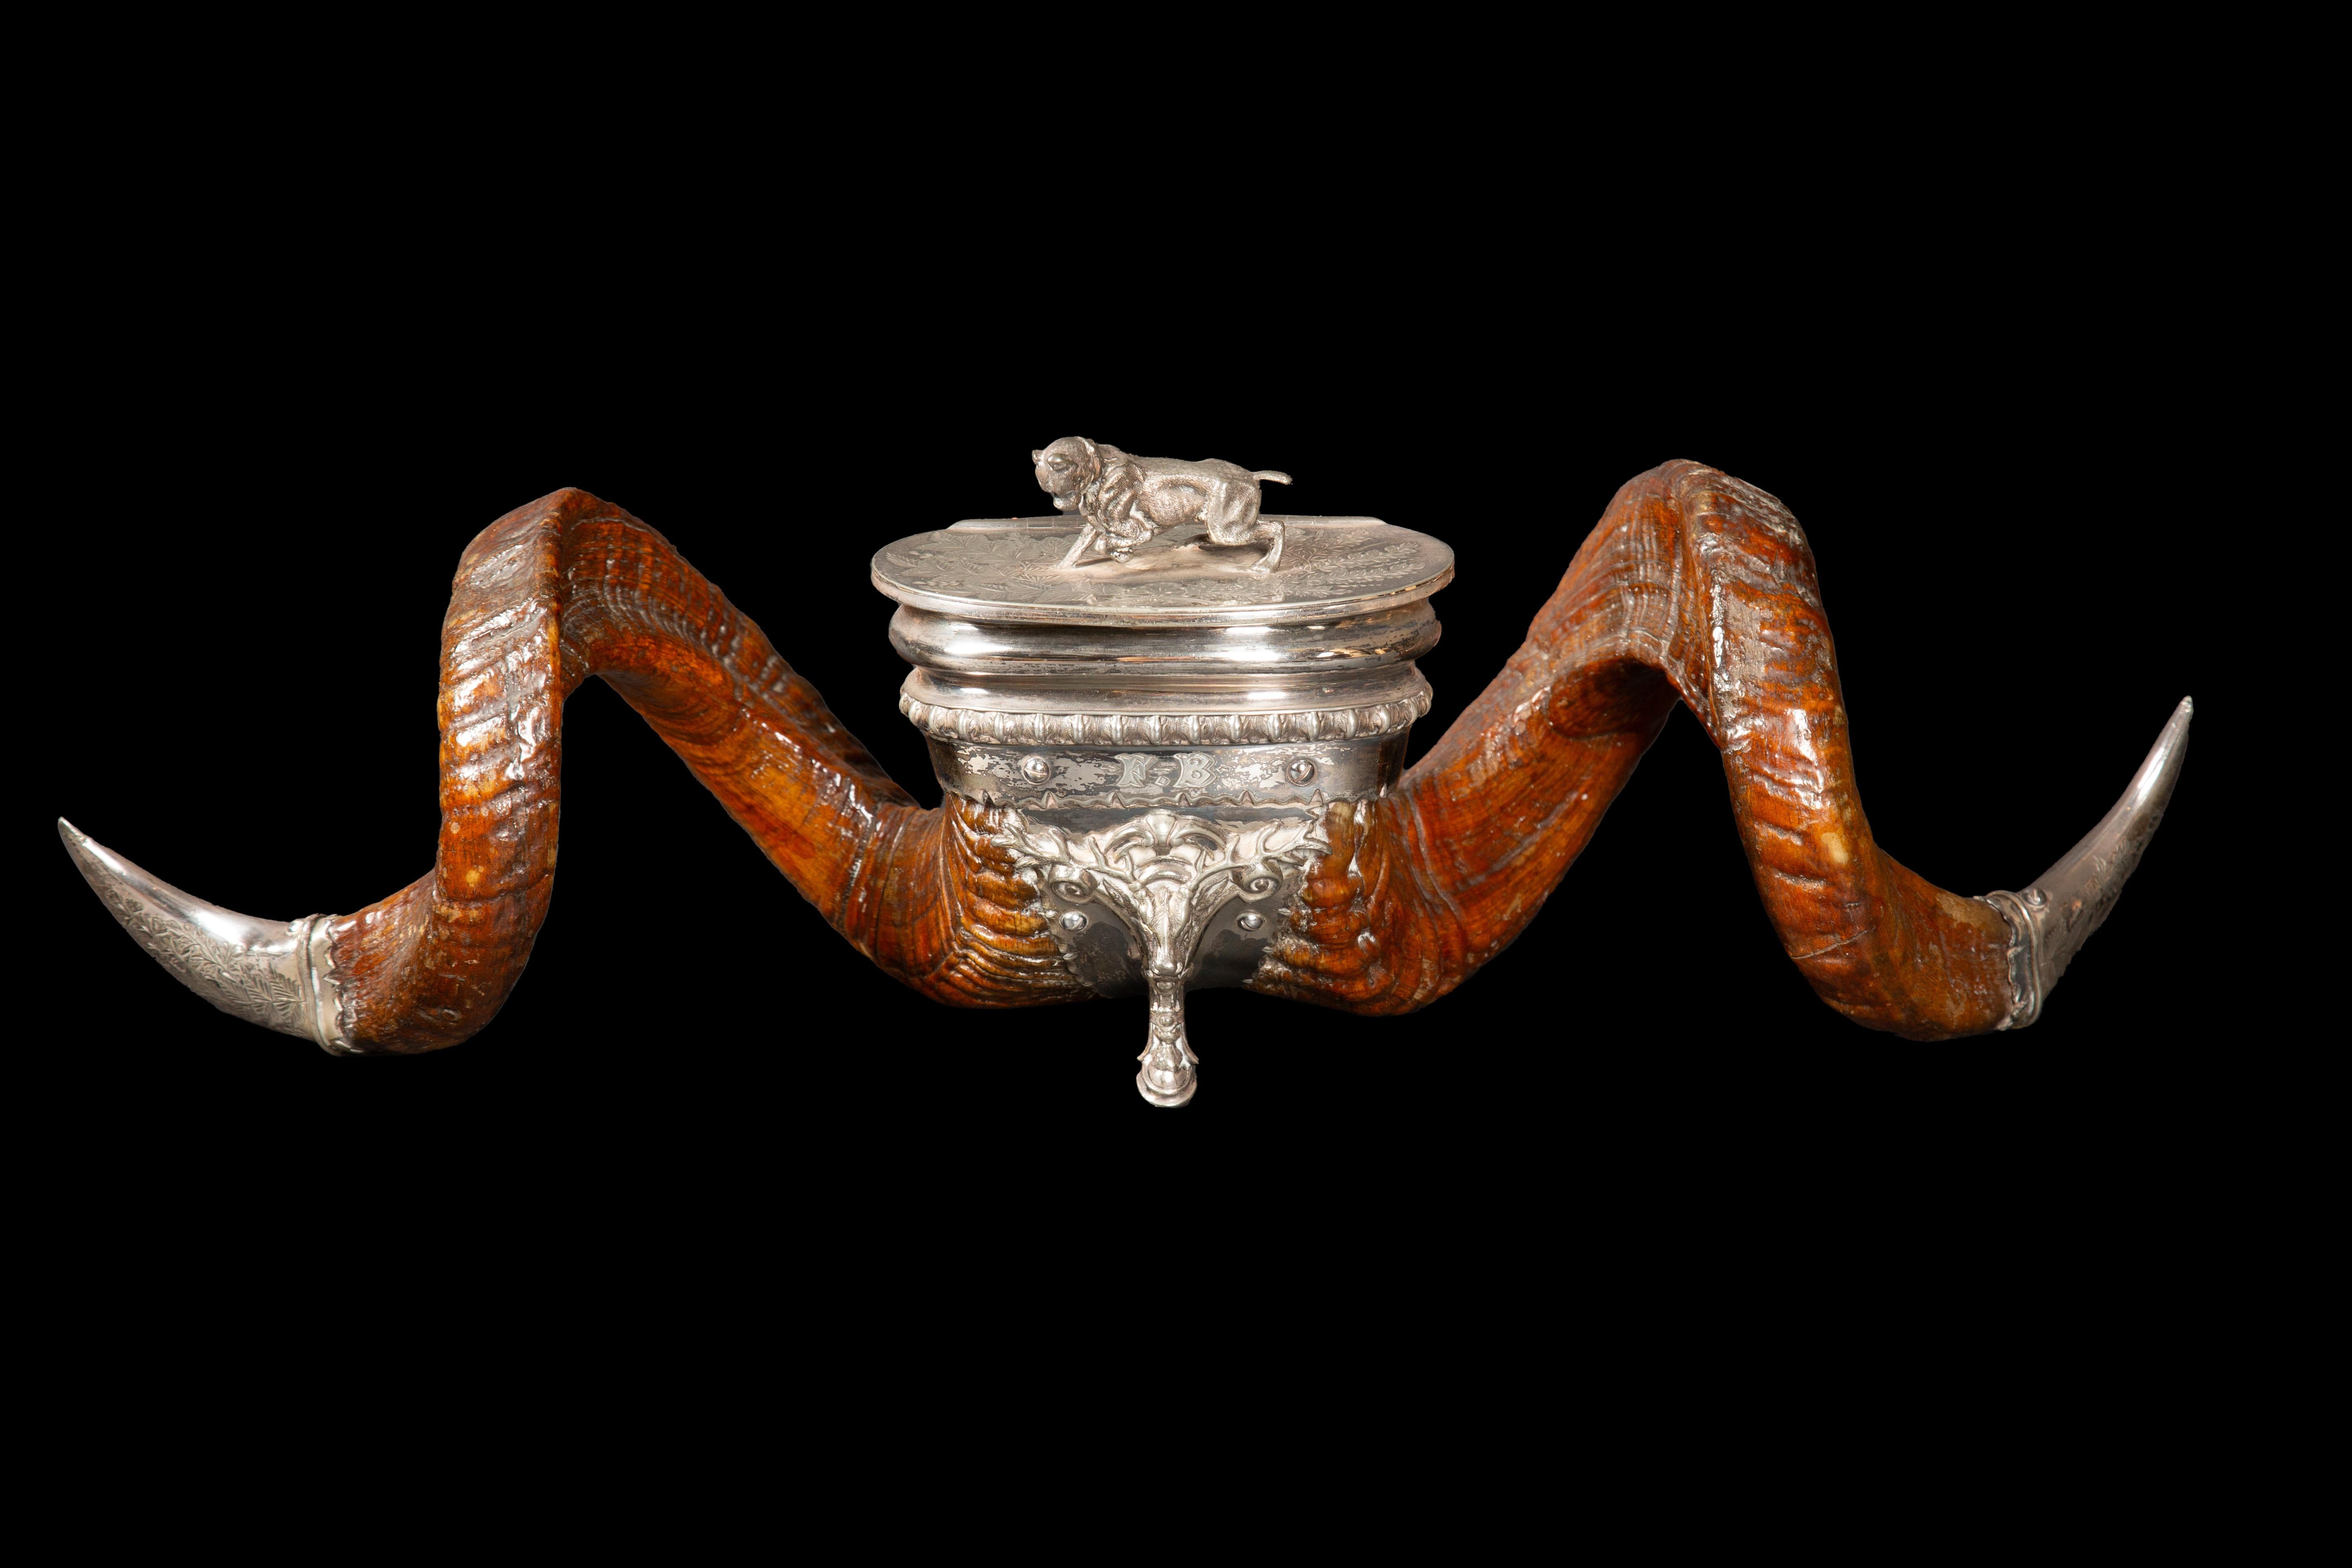 A VICTORIAN RAM'S HORN SNUFF MULL WITH ELECTROPLATED MOUNTS 
MARK OF WALKER & HALL OF SHEFFIELD, CIRCA 1880 
Cover surmounted by a boxer dog and engraved with ferns, on a stag's head and hoof support, the horns tipped with claw-shaped mounts
2 in.